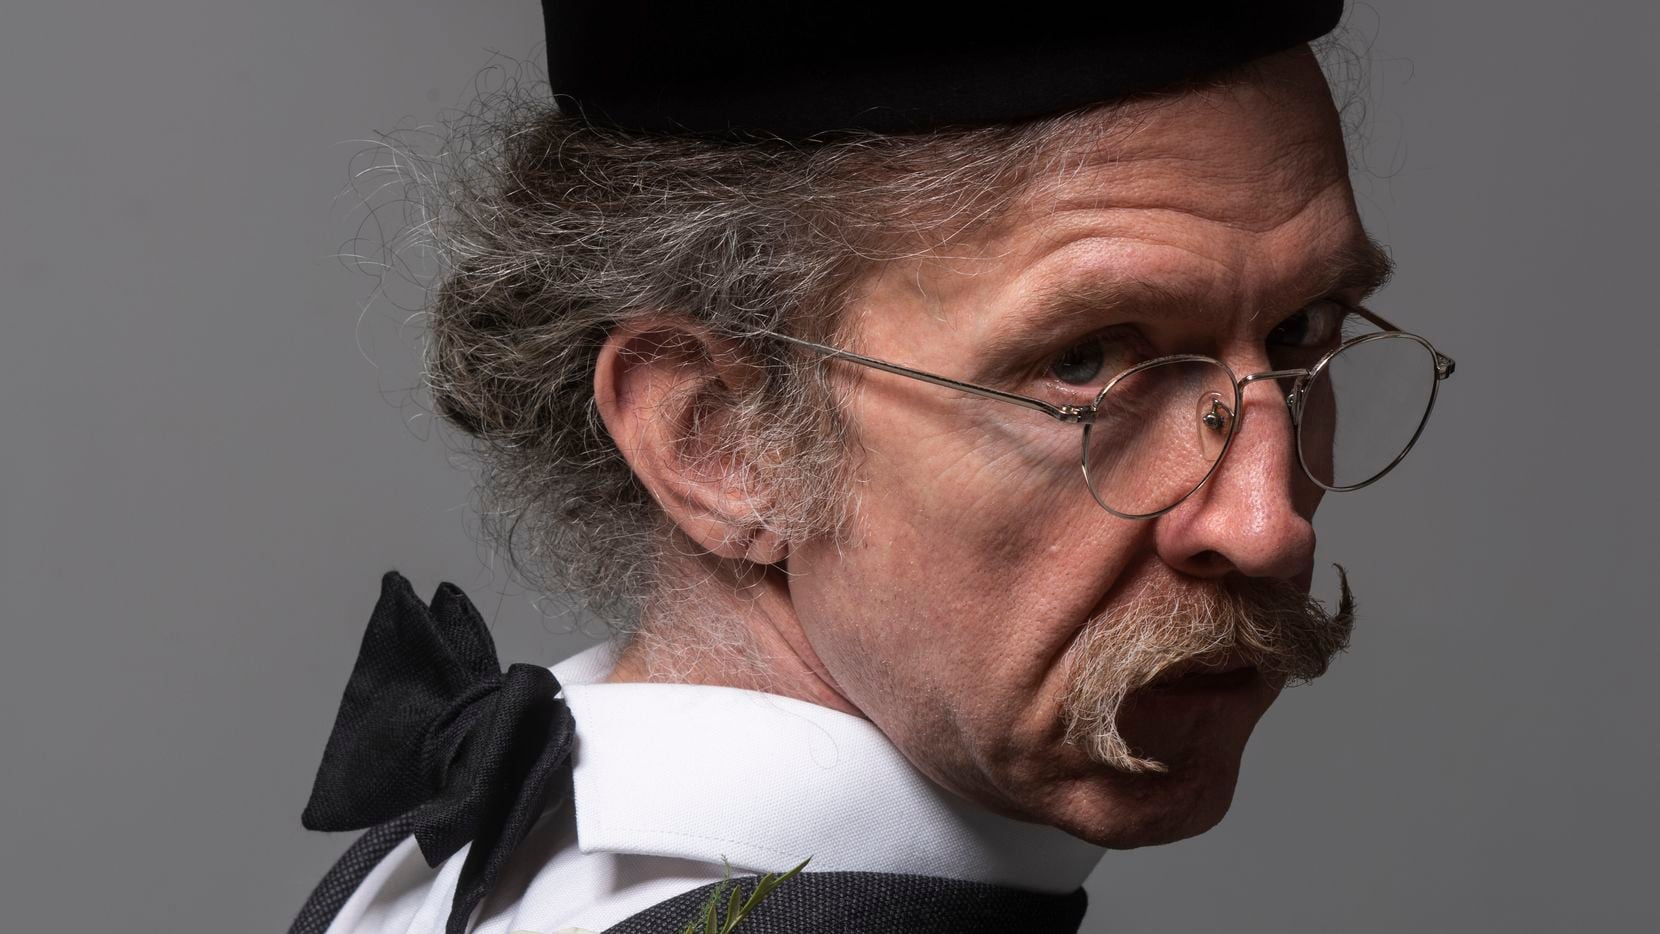 Martin Creed will perform his one-man show at the Nasher Sculpture Center on Nov. 16.